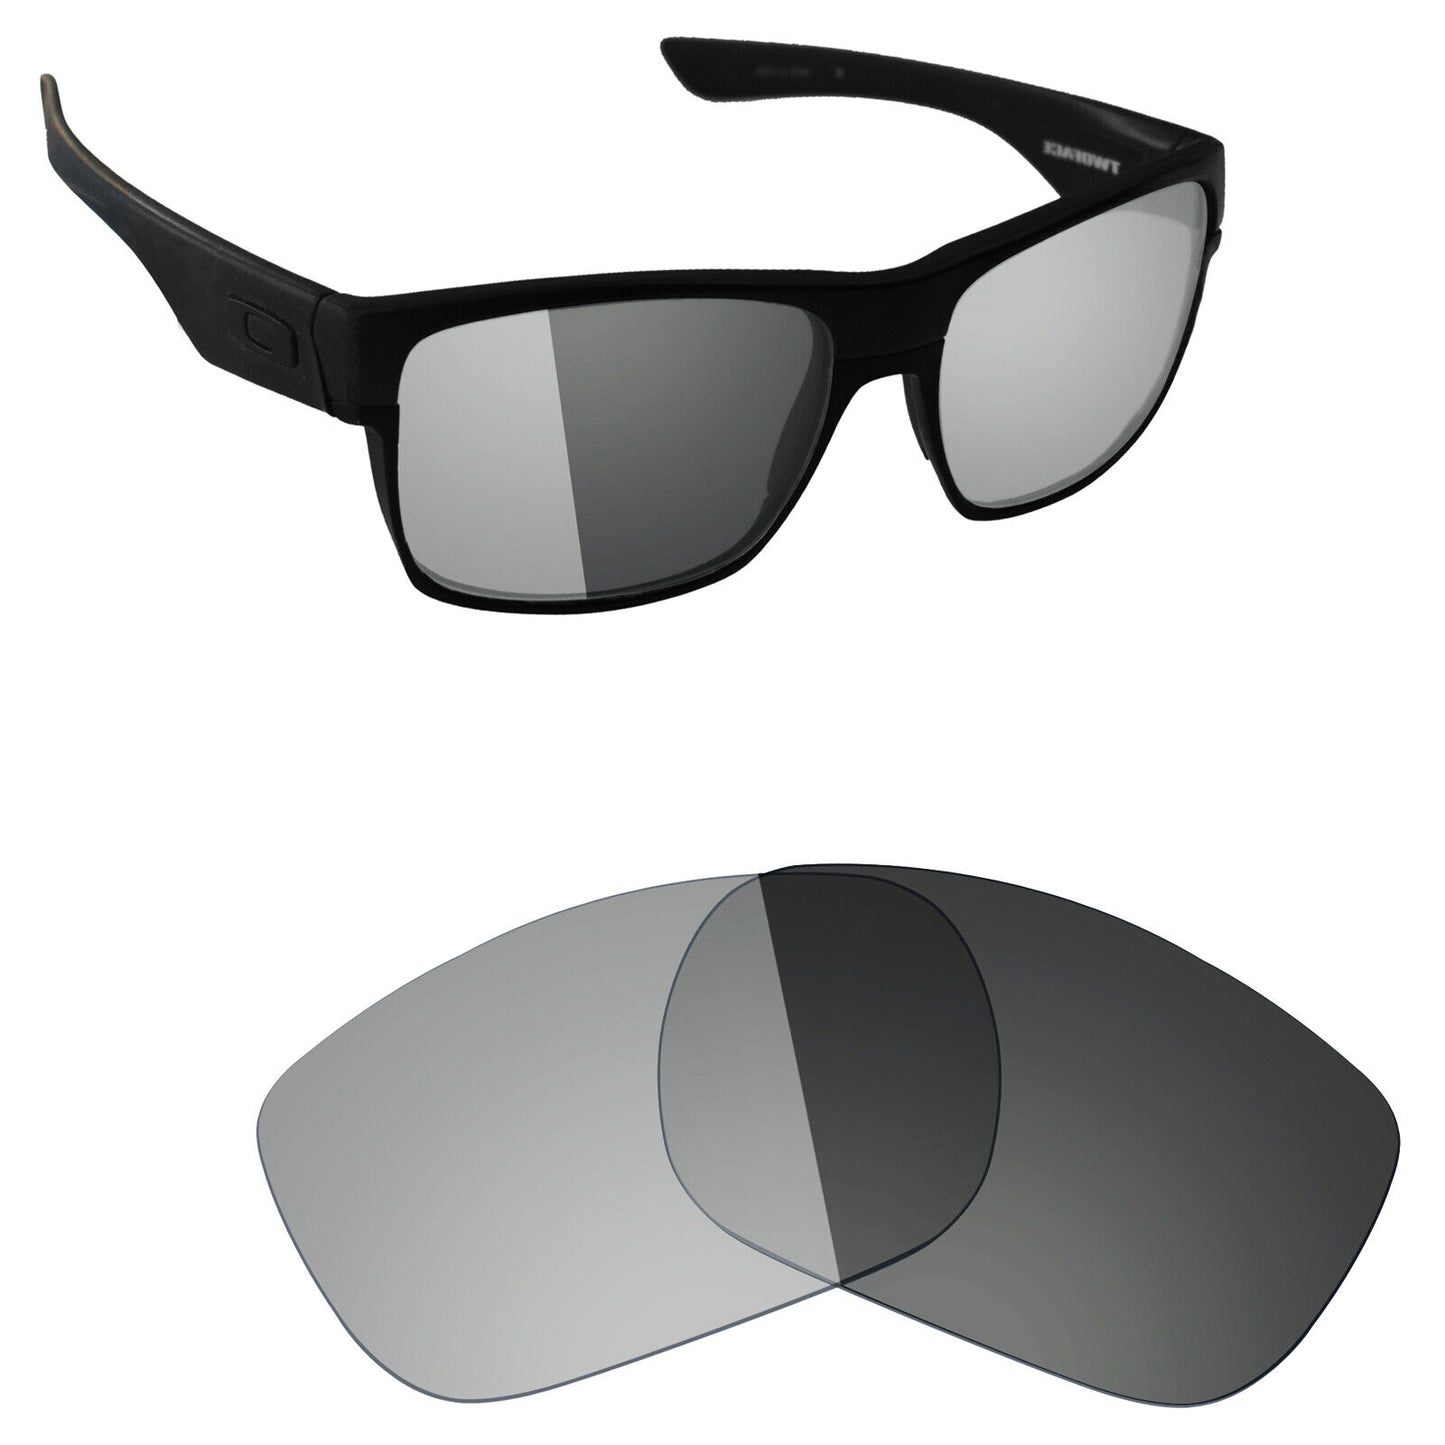 Hawkry Polarized Replacement Lens for-Oakley TwoFace OO9189 Sunglass - Multiple